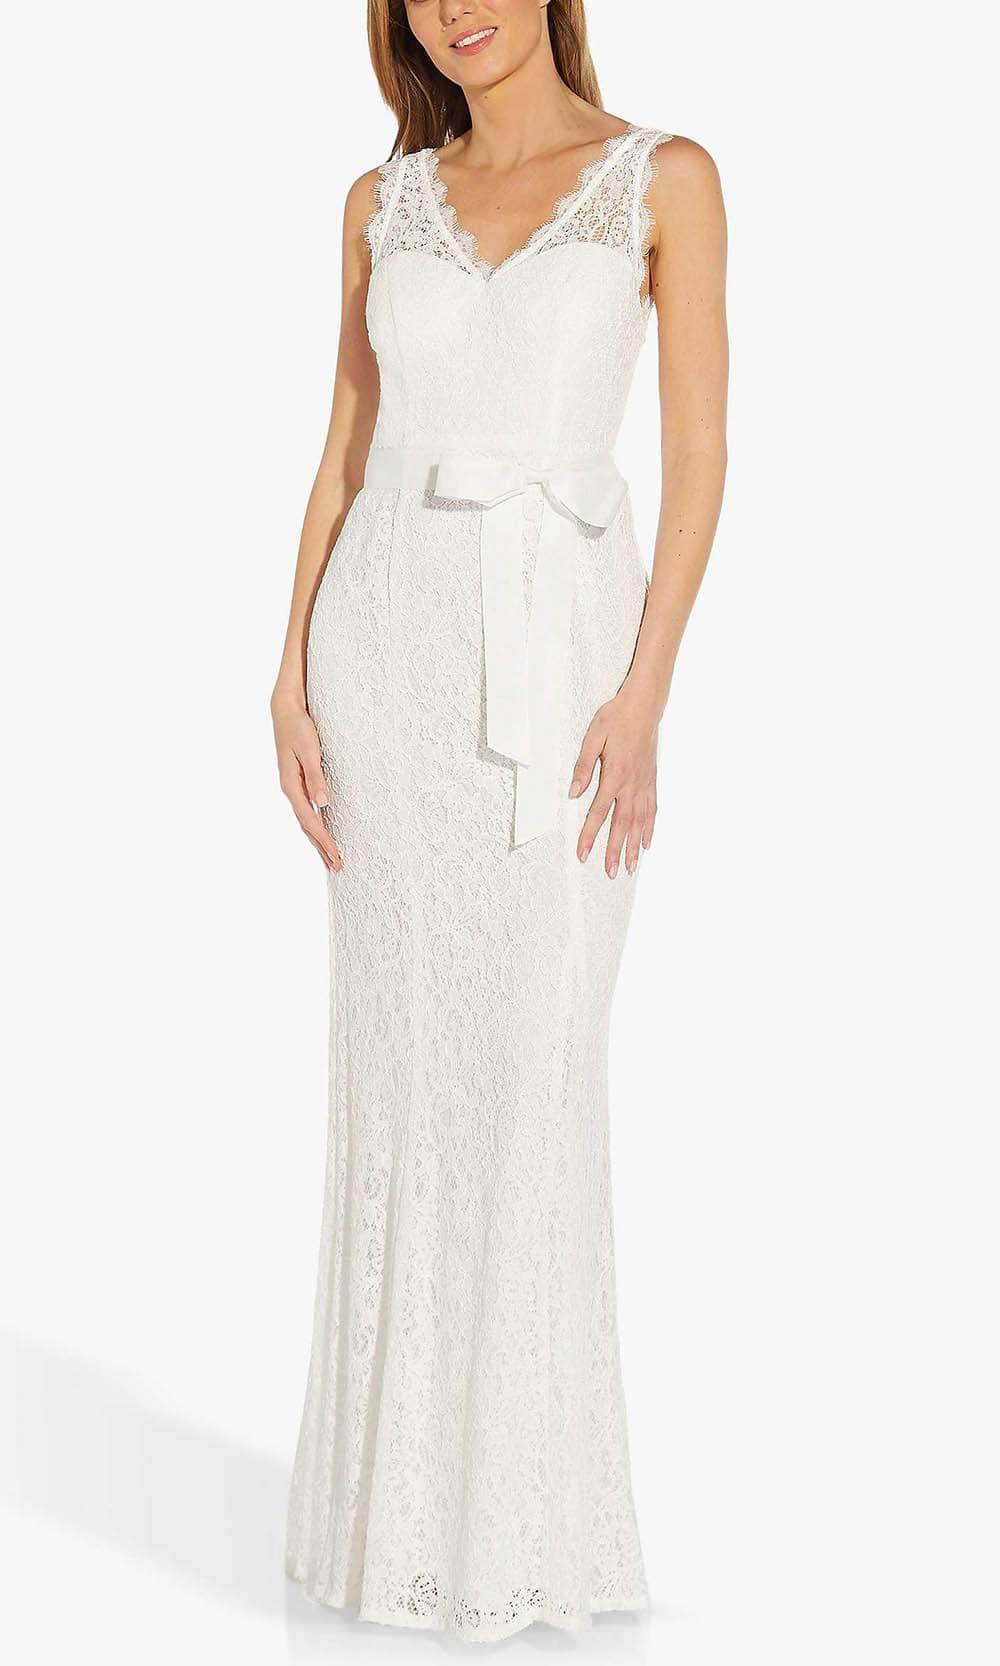 Image of Adrianna Papell 091890120 - Sleeveless Lace Evening Dress